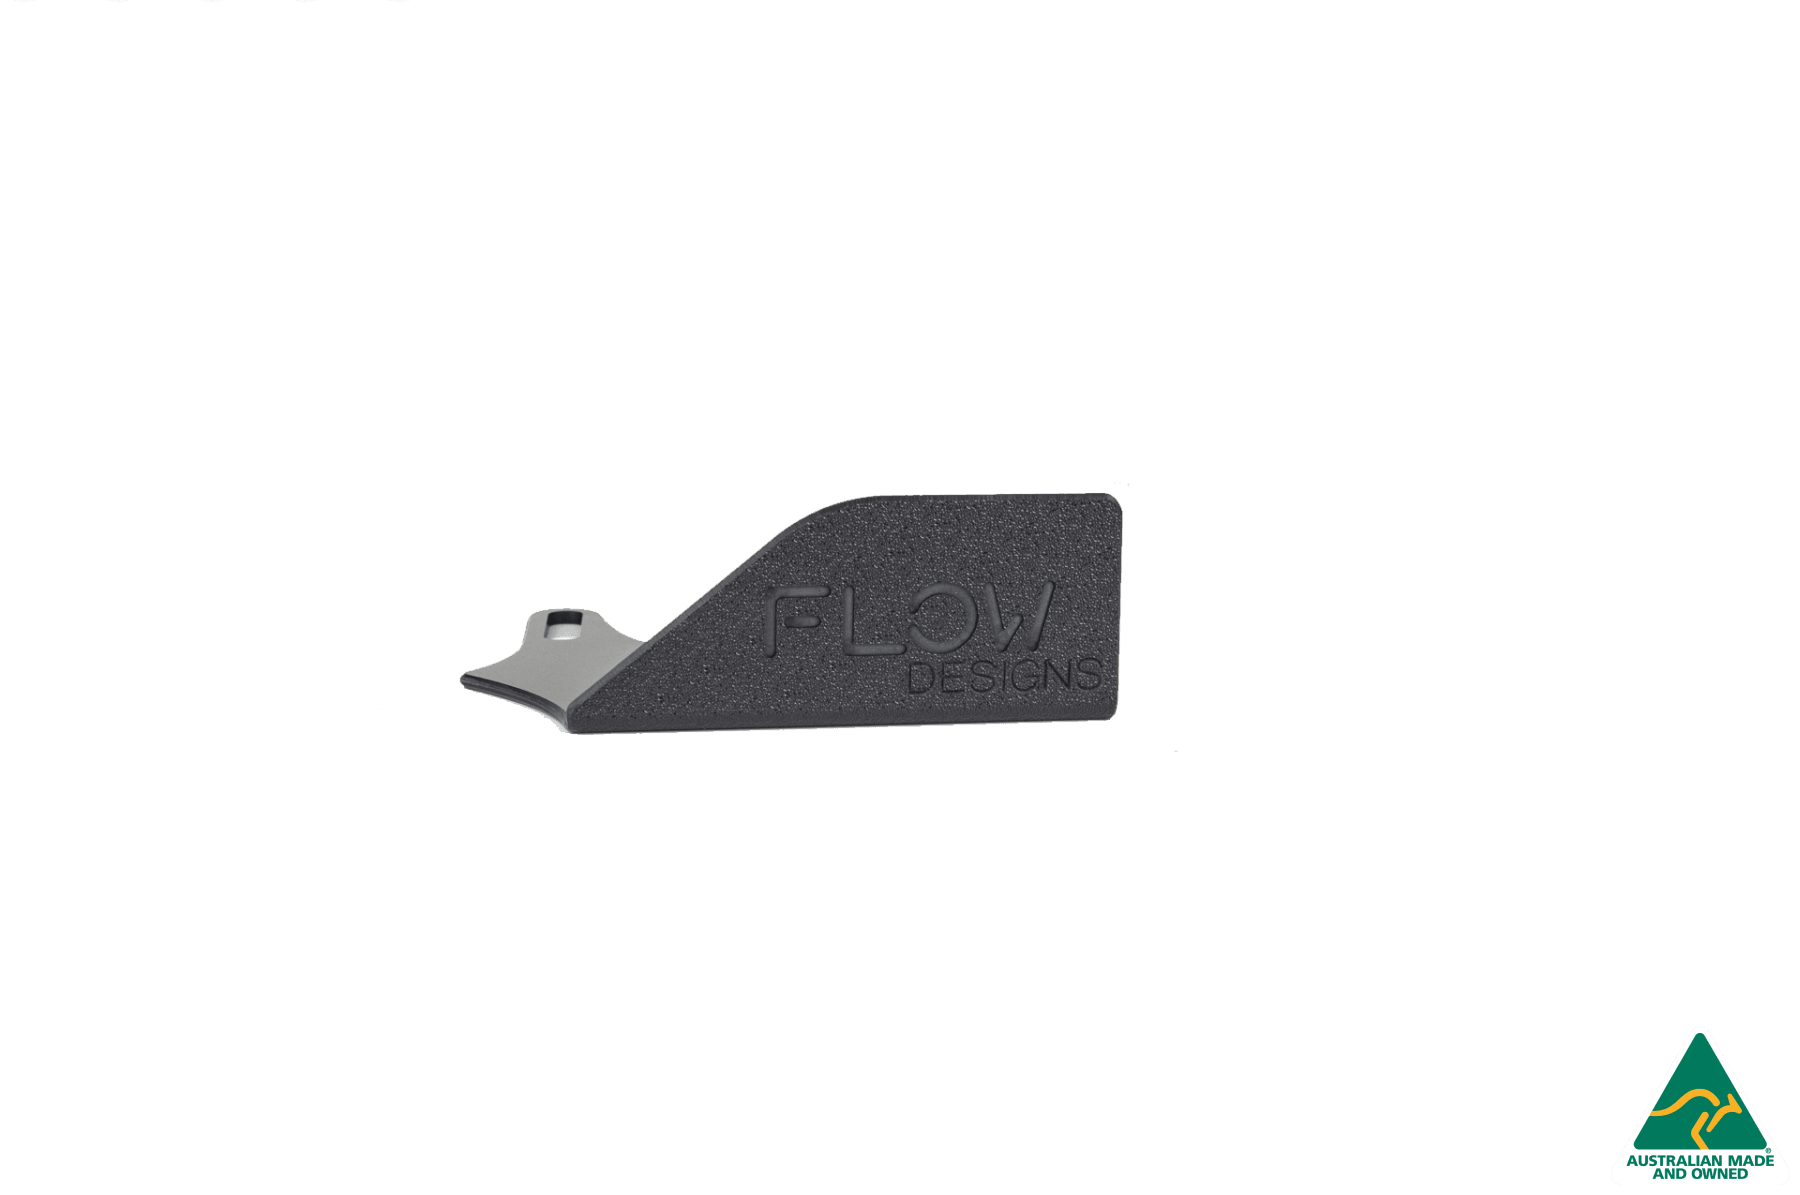 i30N Hatch PD (2018-2020) Rear Spat Winglets (Pair) - MODE Auto Concepts